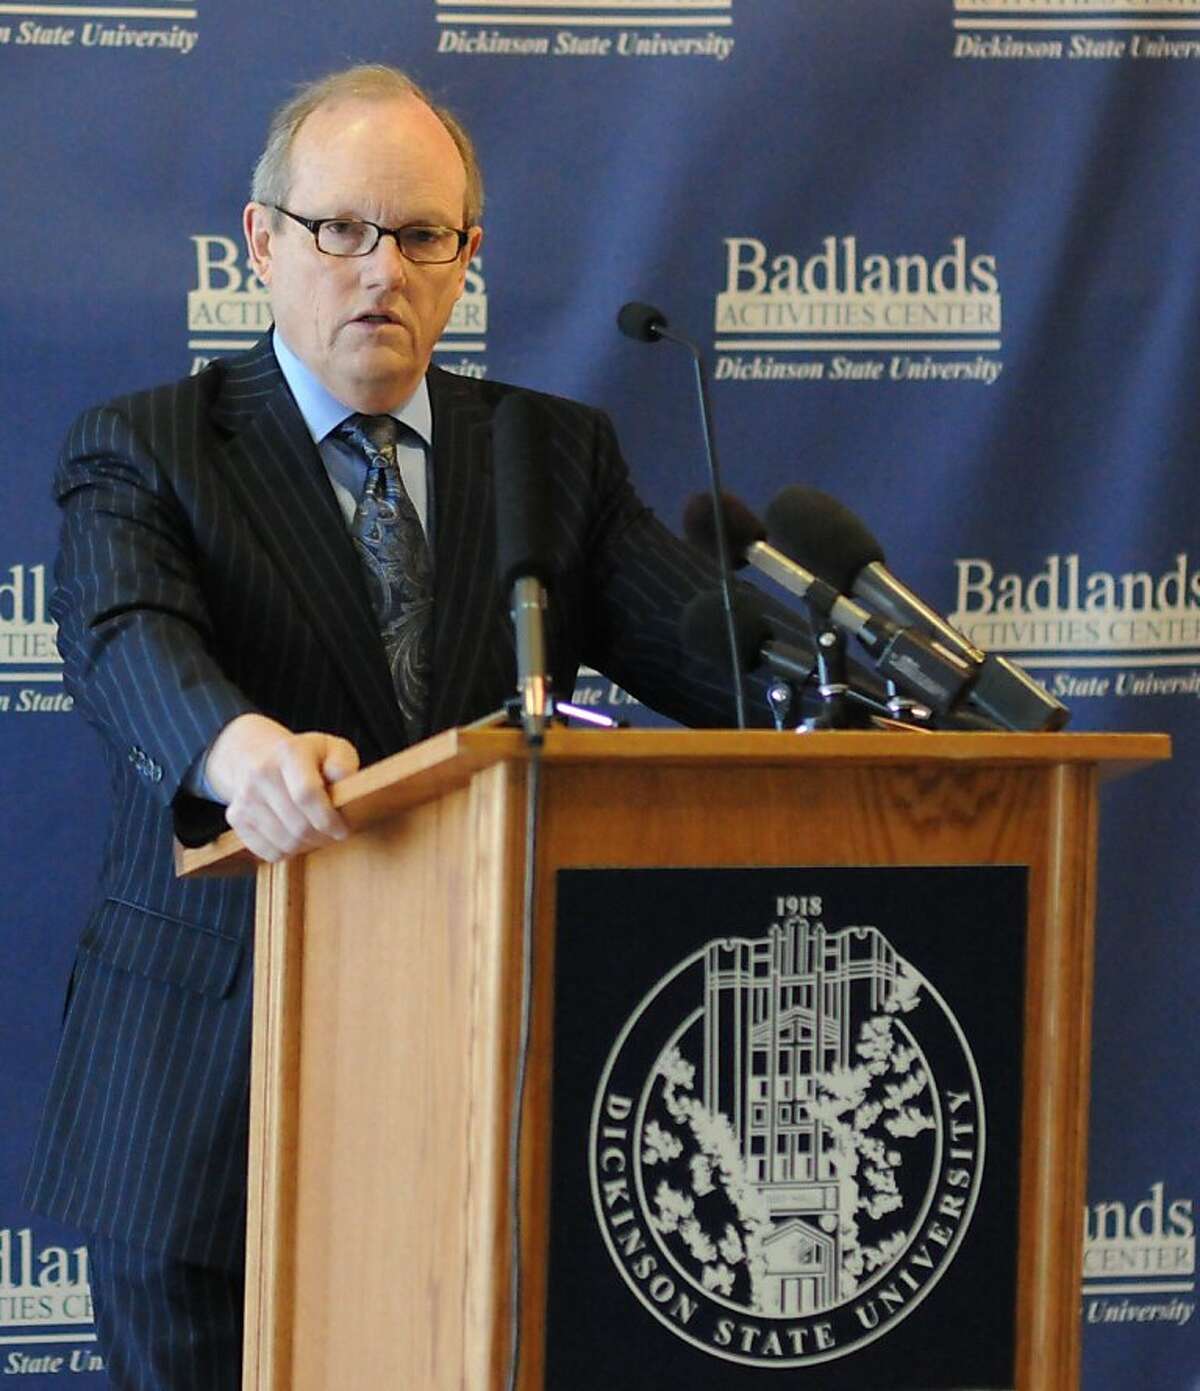 Dickinson State University President D.C. Coston speaks on Friday, Feb. 10, 2012, at the Badlands Activities Center in Dickinson, N.D. According to an audit report, the university awarded hundreds of degrees to foreign students who did not earn them.